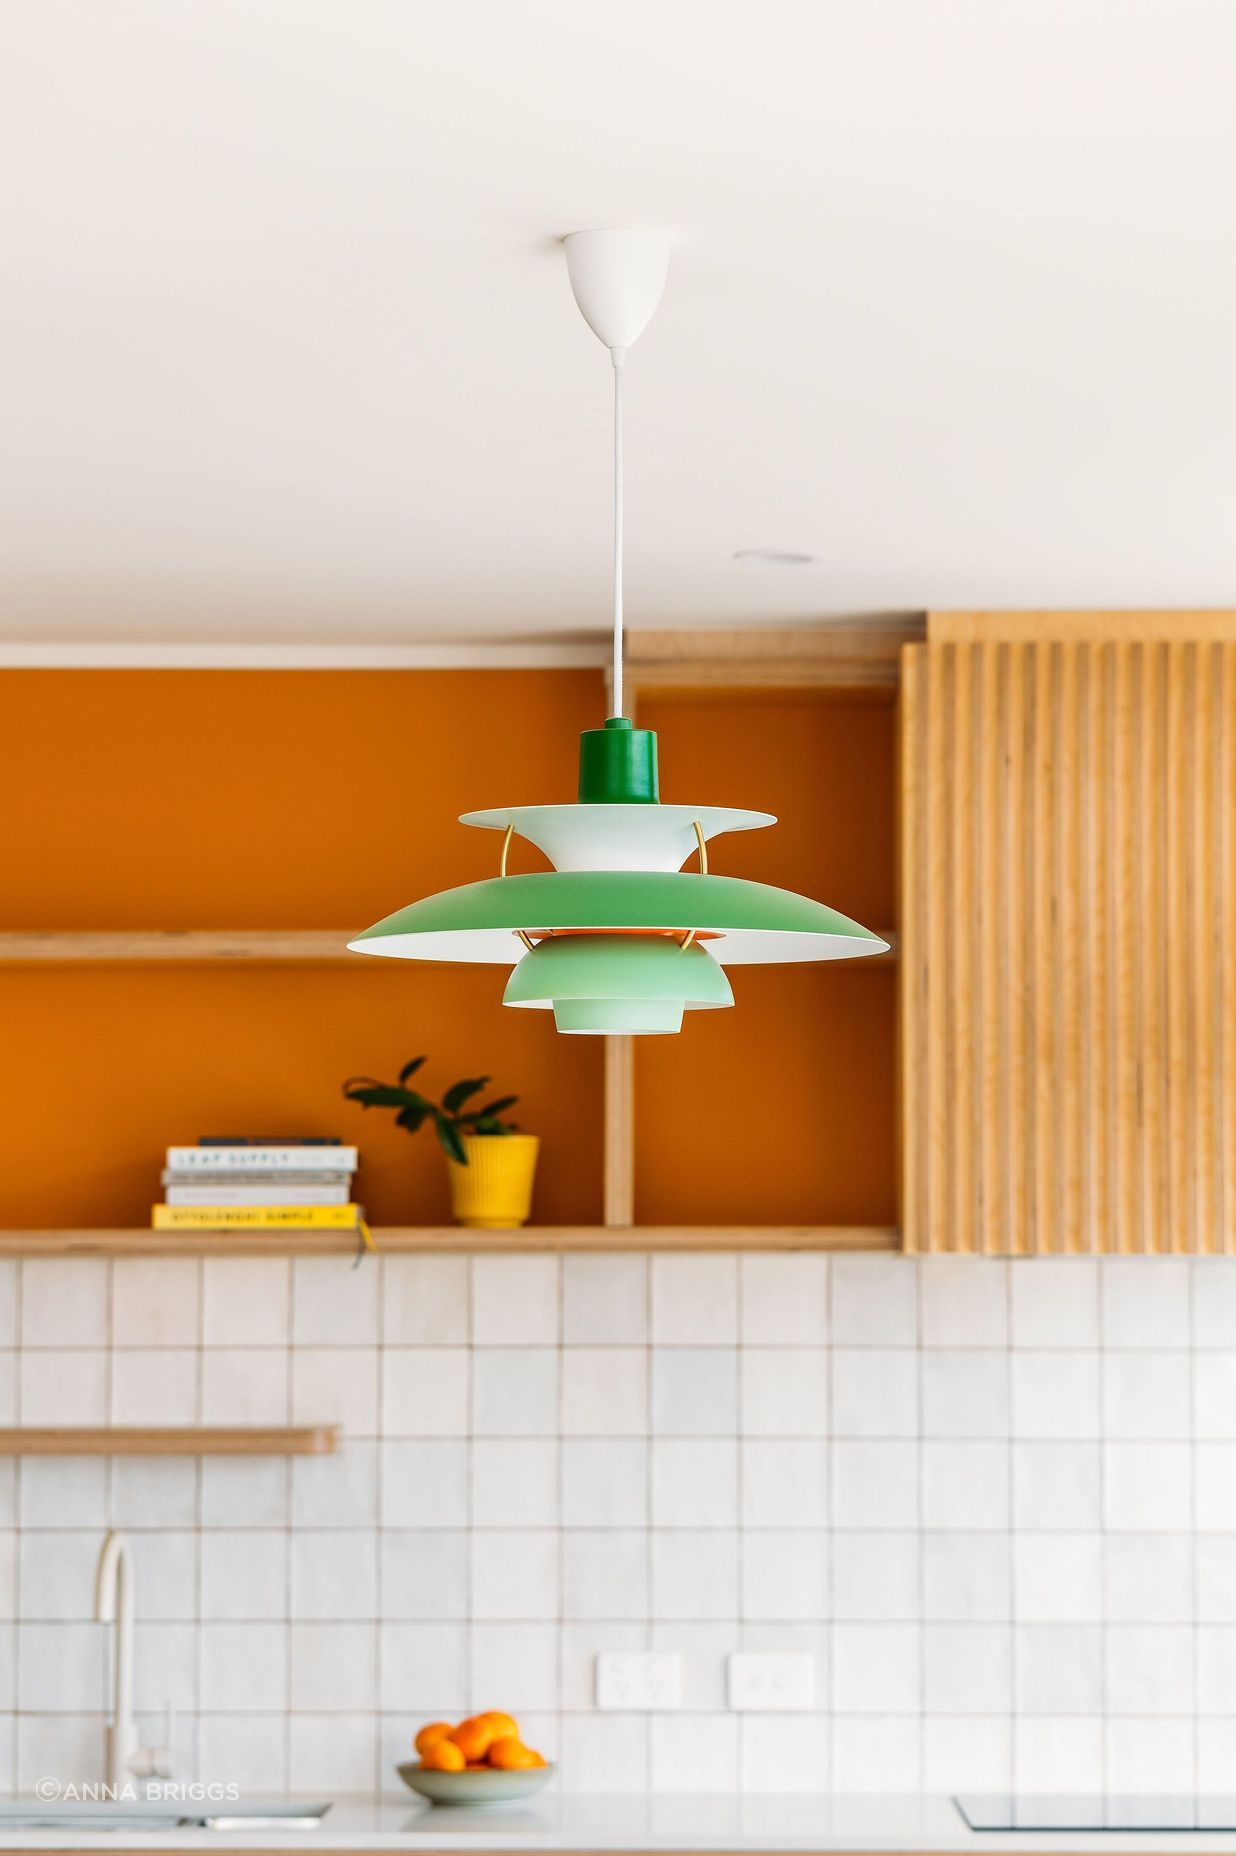 The replica PH5 lamp sits in perfect harmony with the mid-century inspired design and colour scheme.